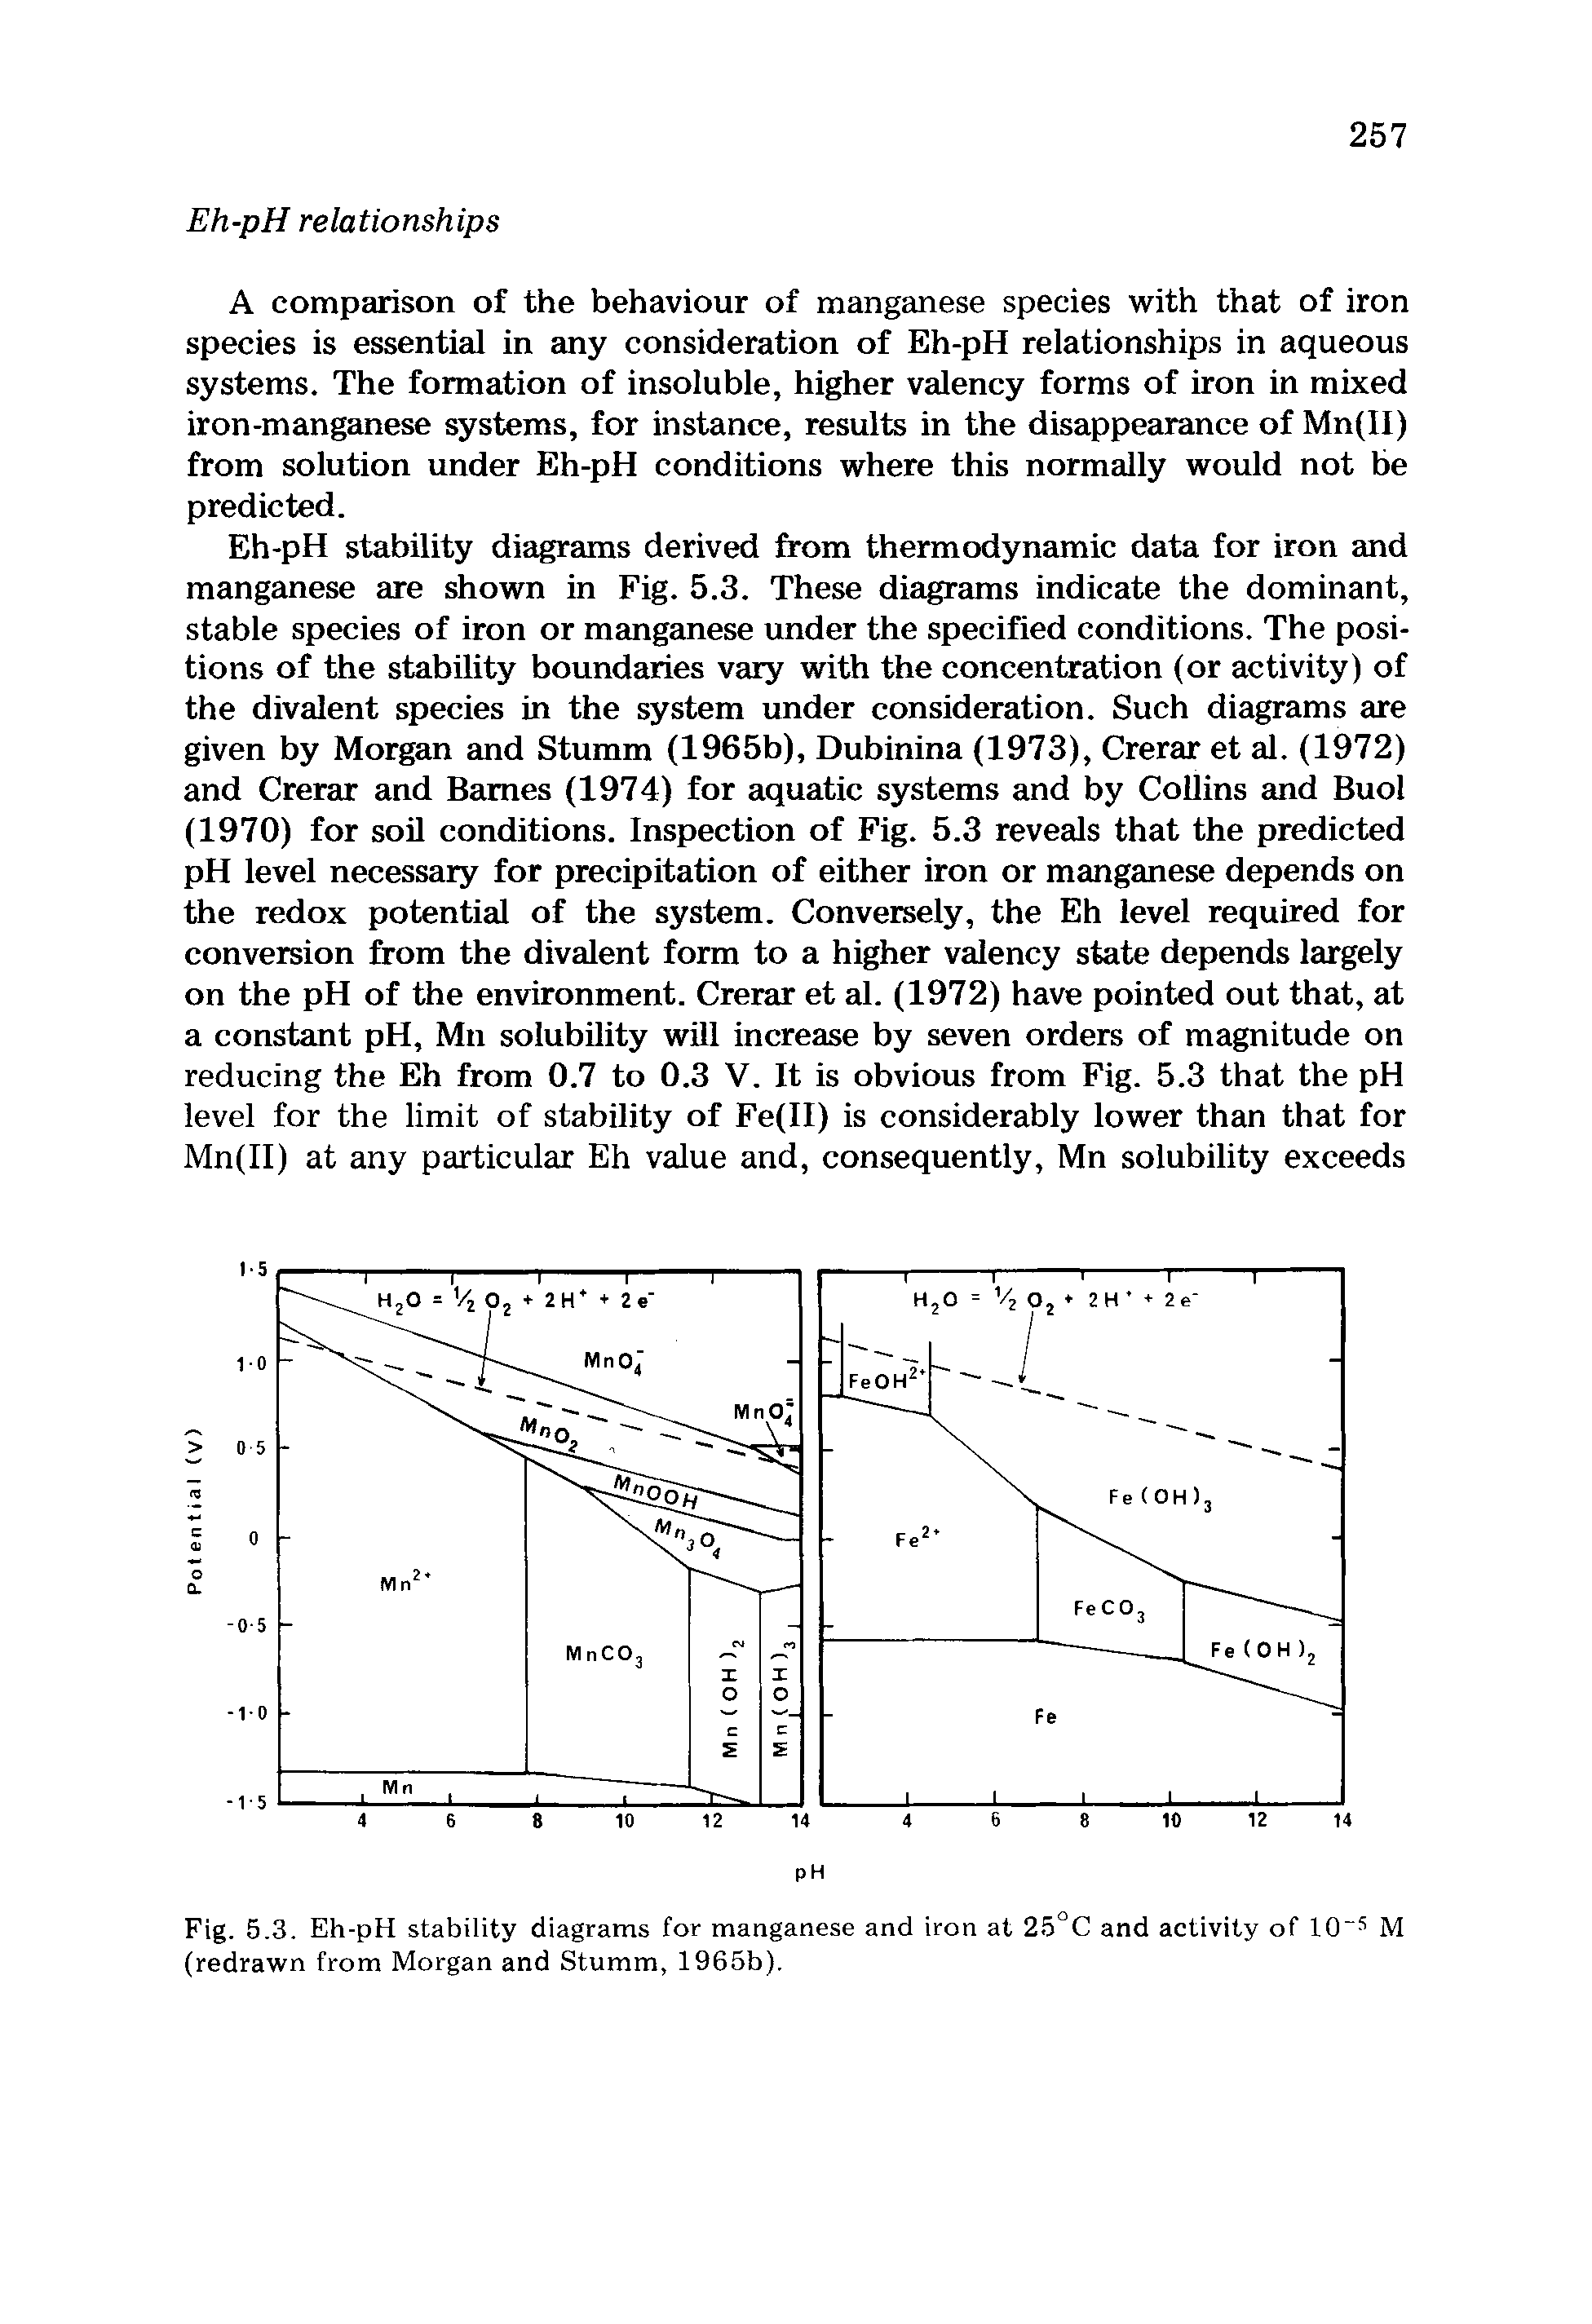 Fig. 5.3. Eh-pH stability diagrams for manganese and iron at 25°C and activity of 10 5 M (redrawn from Morgan and Stumm, 1965b).